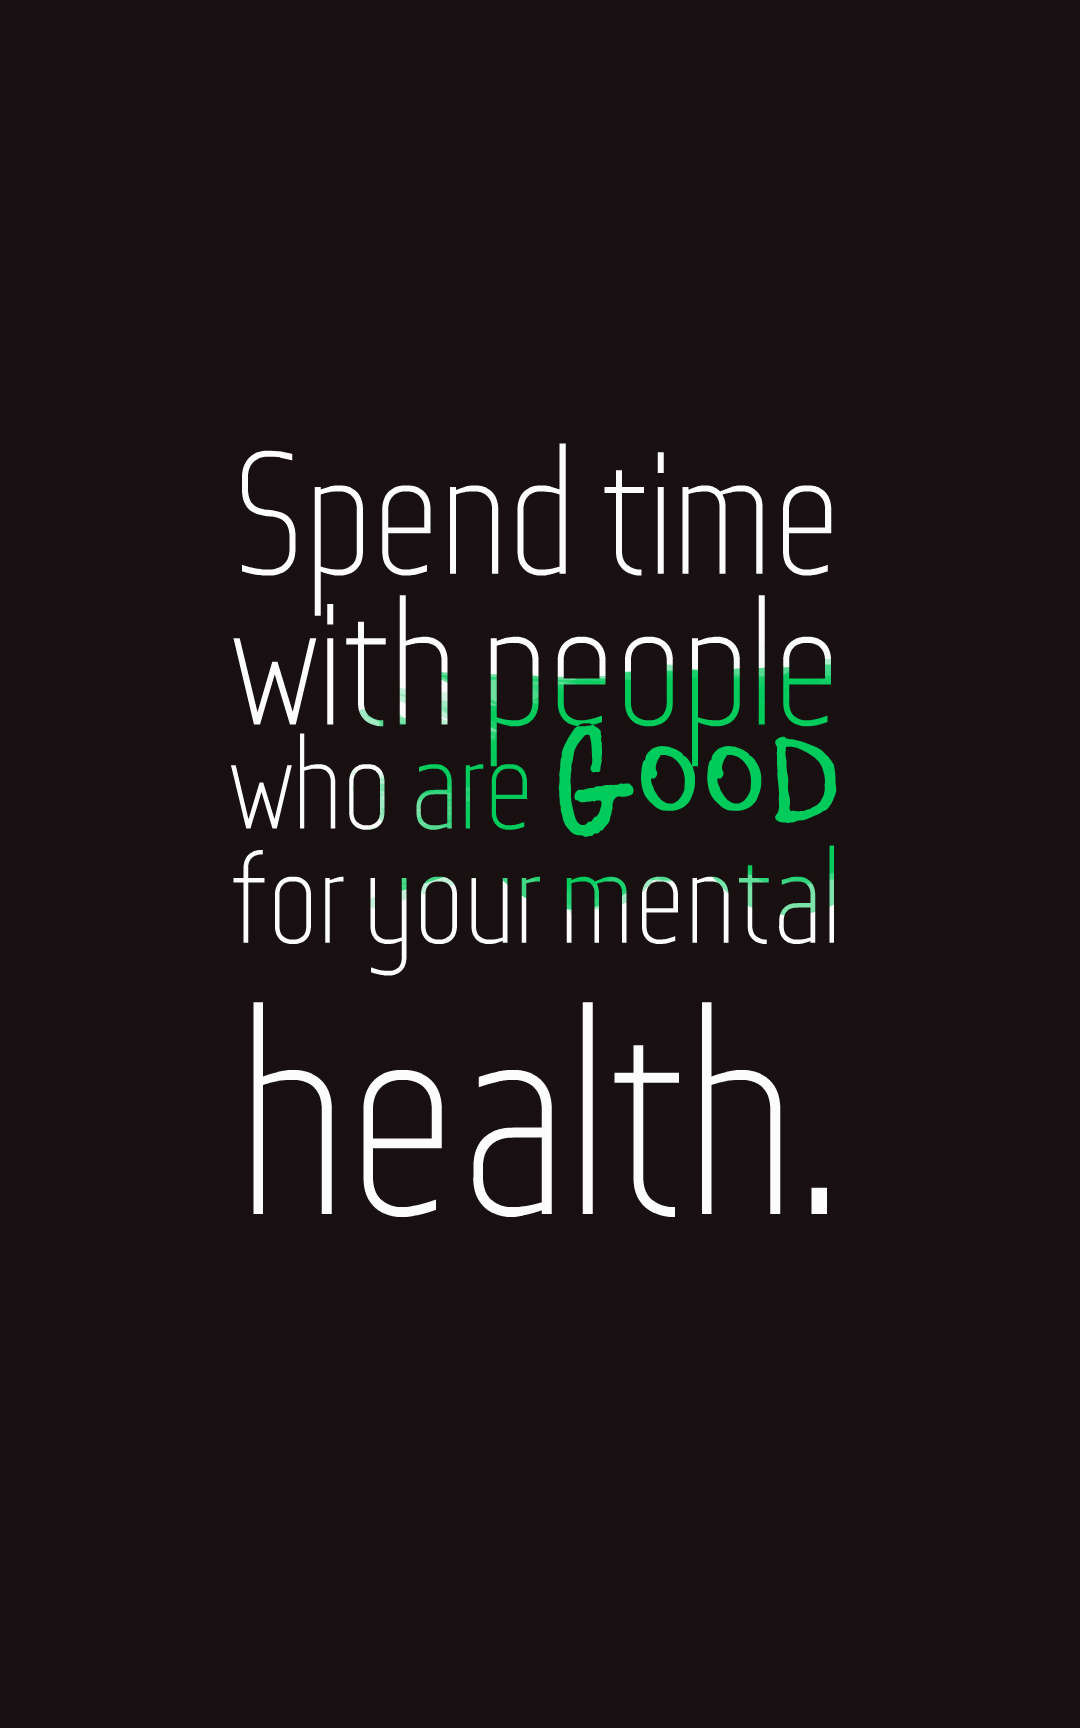 Health Quotes Inspirational
 35 Inspirational Mental Health Quotes And Sayings